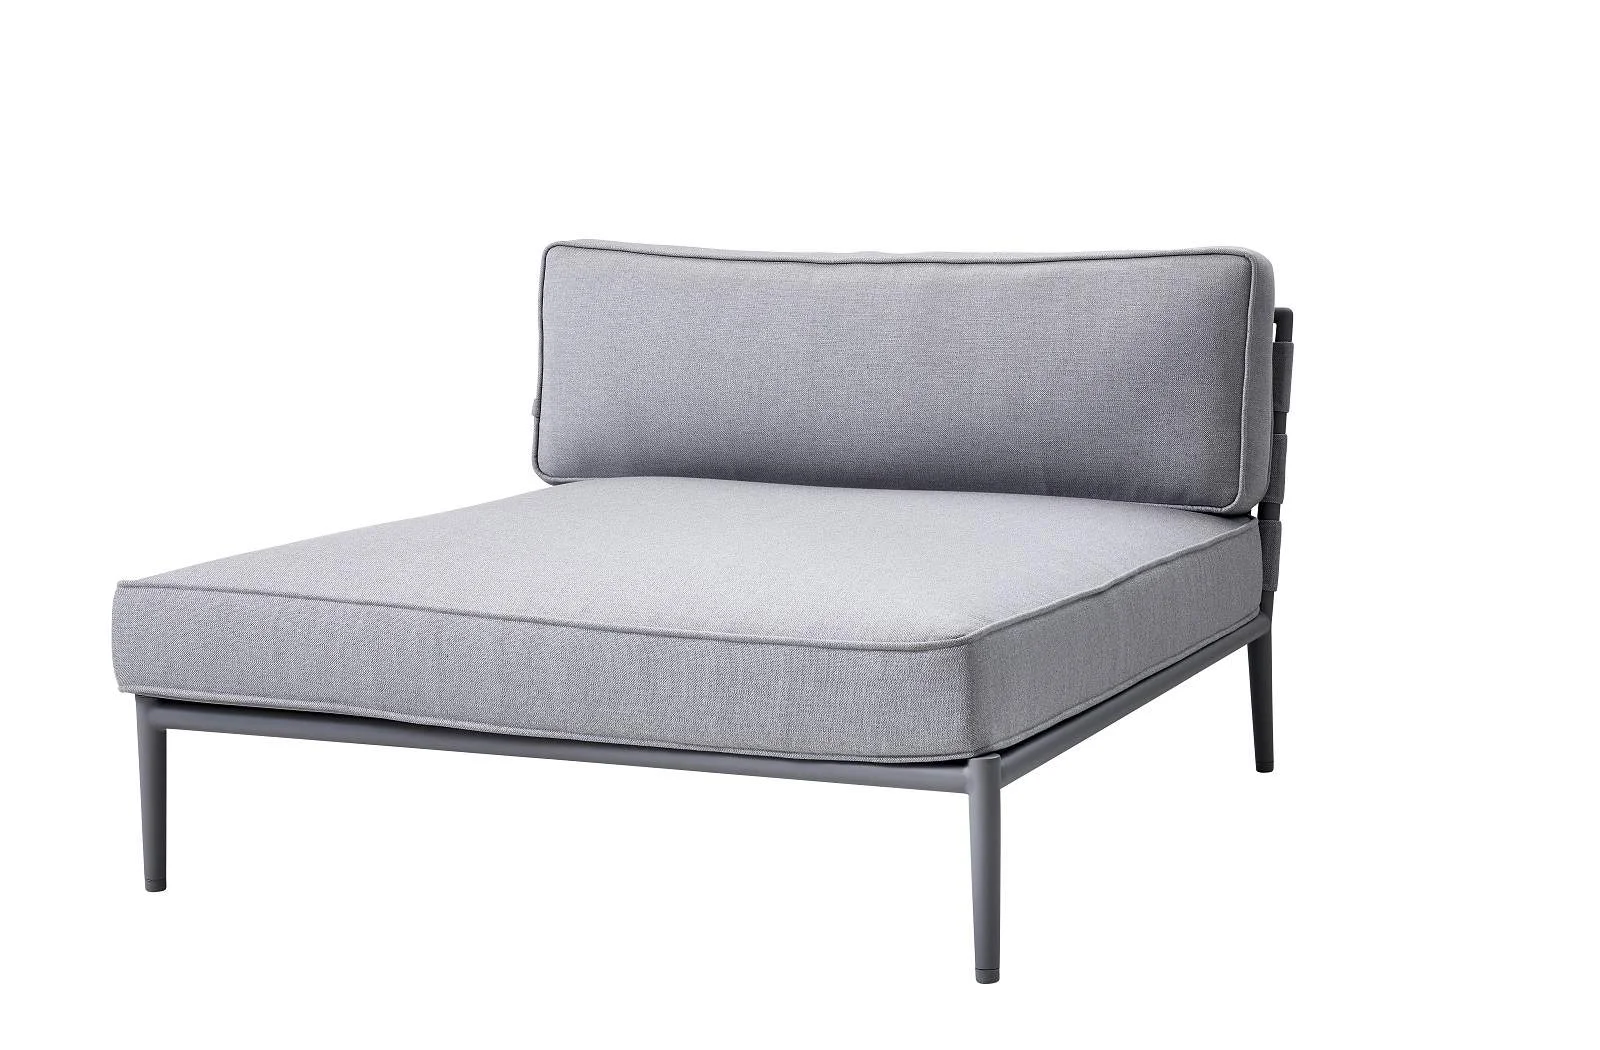 Cane-line Conic | Daybed Modul AirTouch | Light Grey